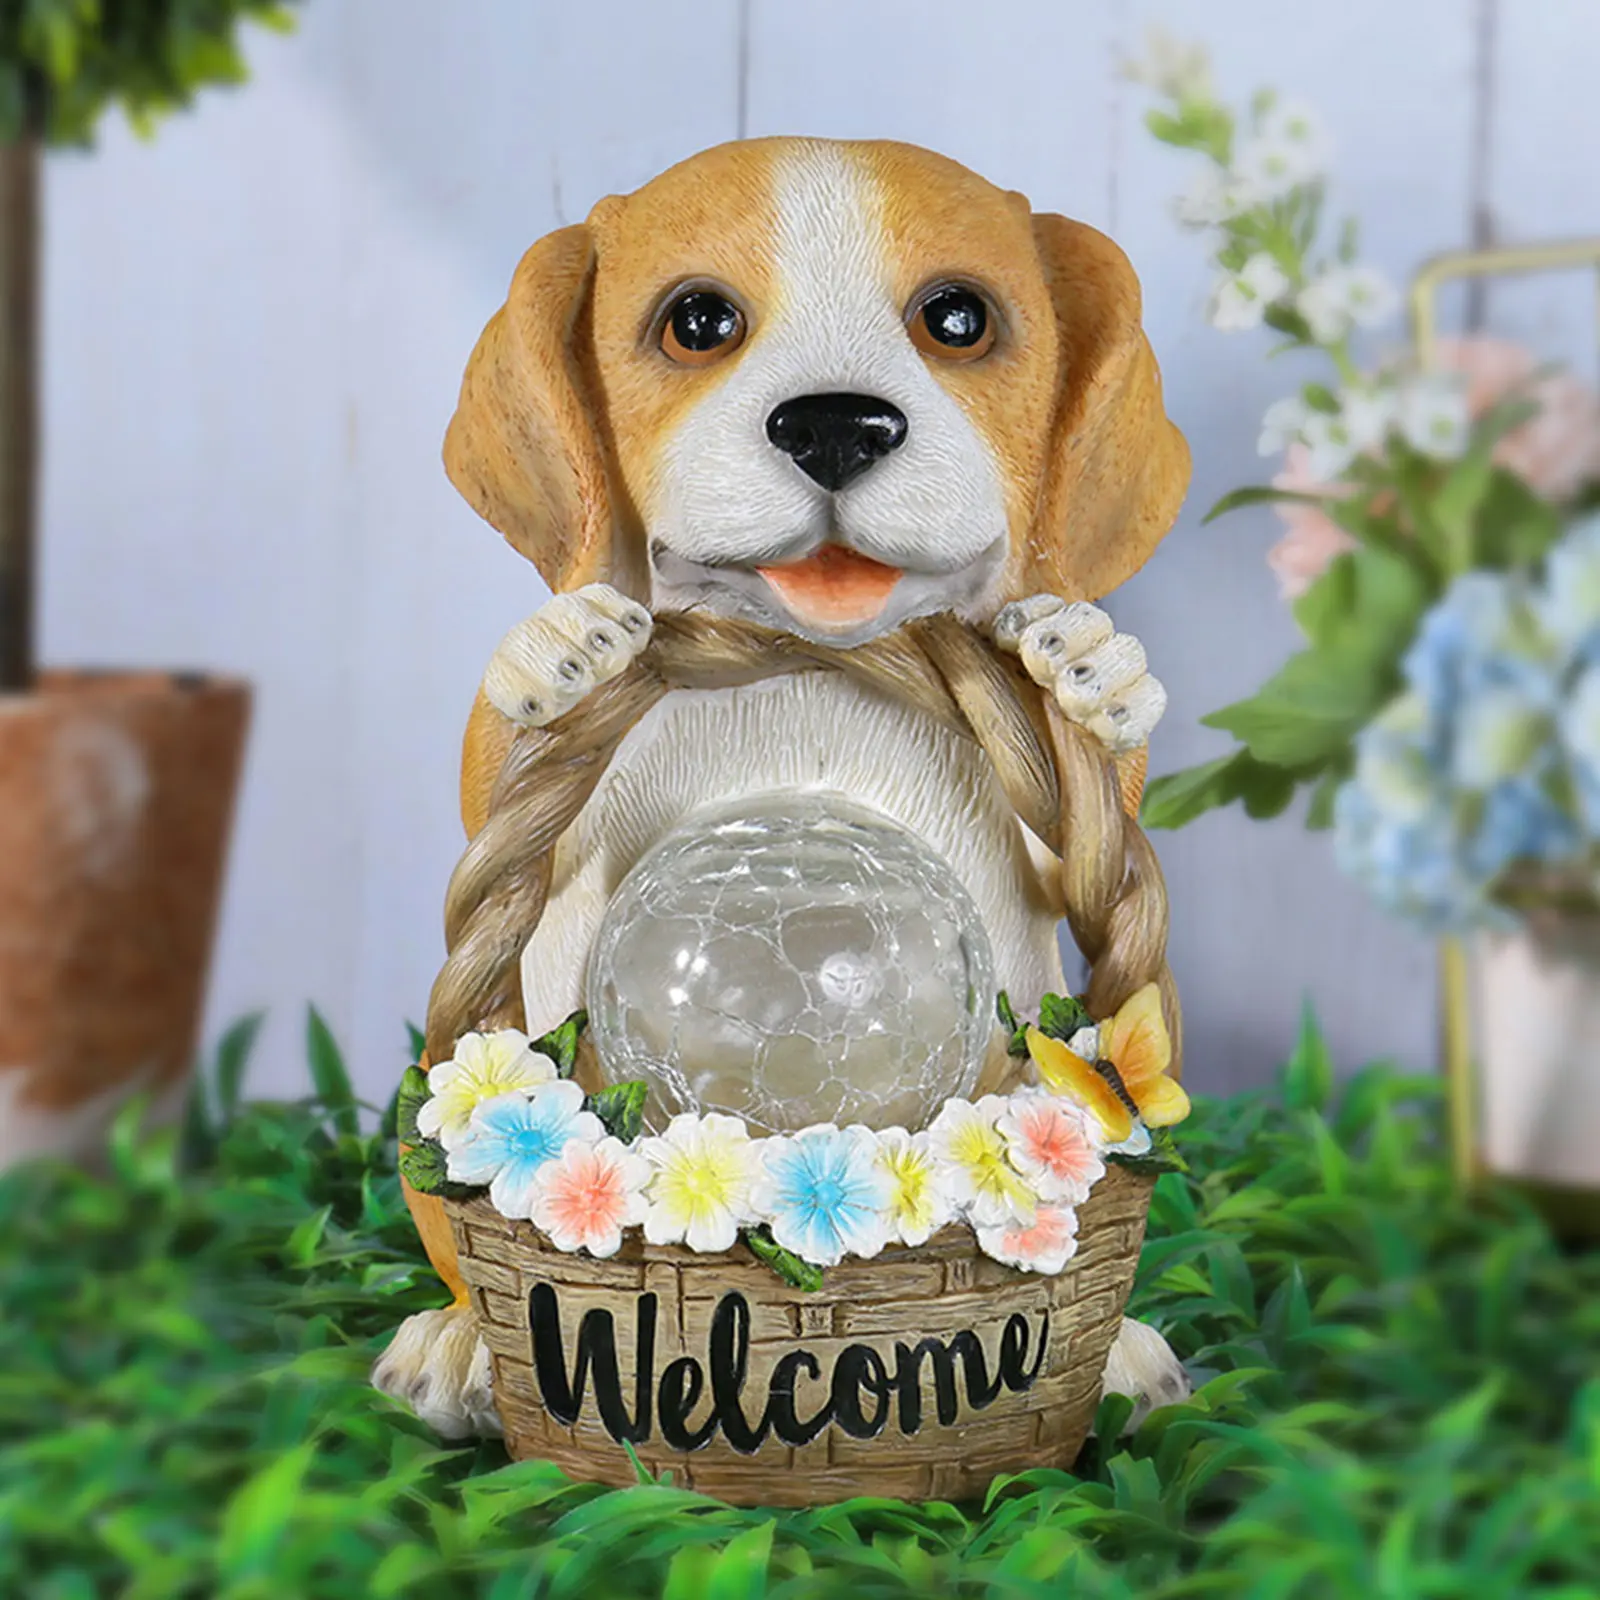 

Resin Sculpture Waterproof Lighted Solar Dog Statues Figurines Welcome Signs Home Outdoor Garden Yard Decoration